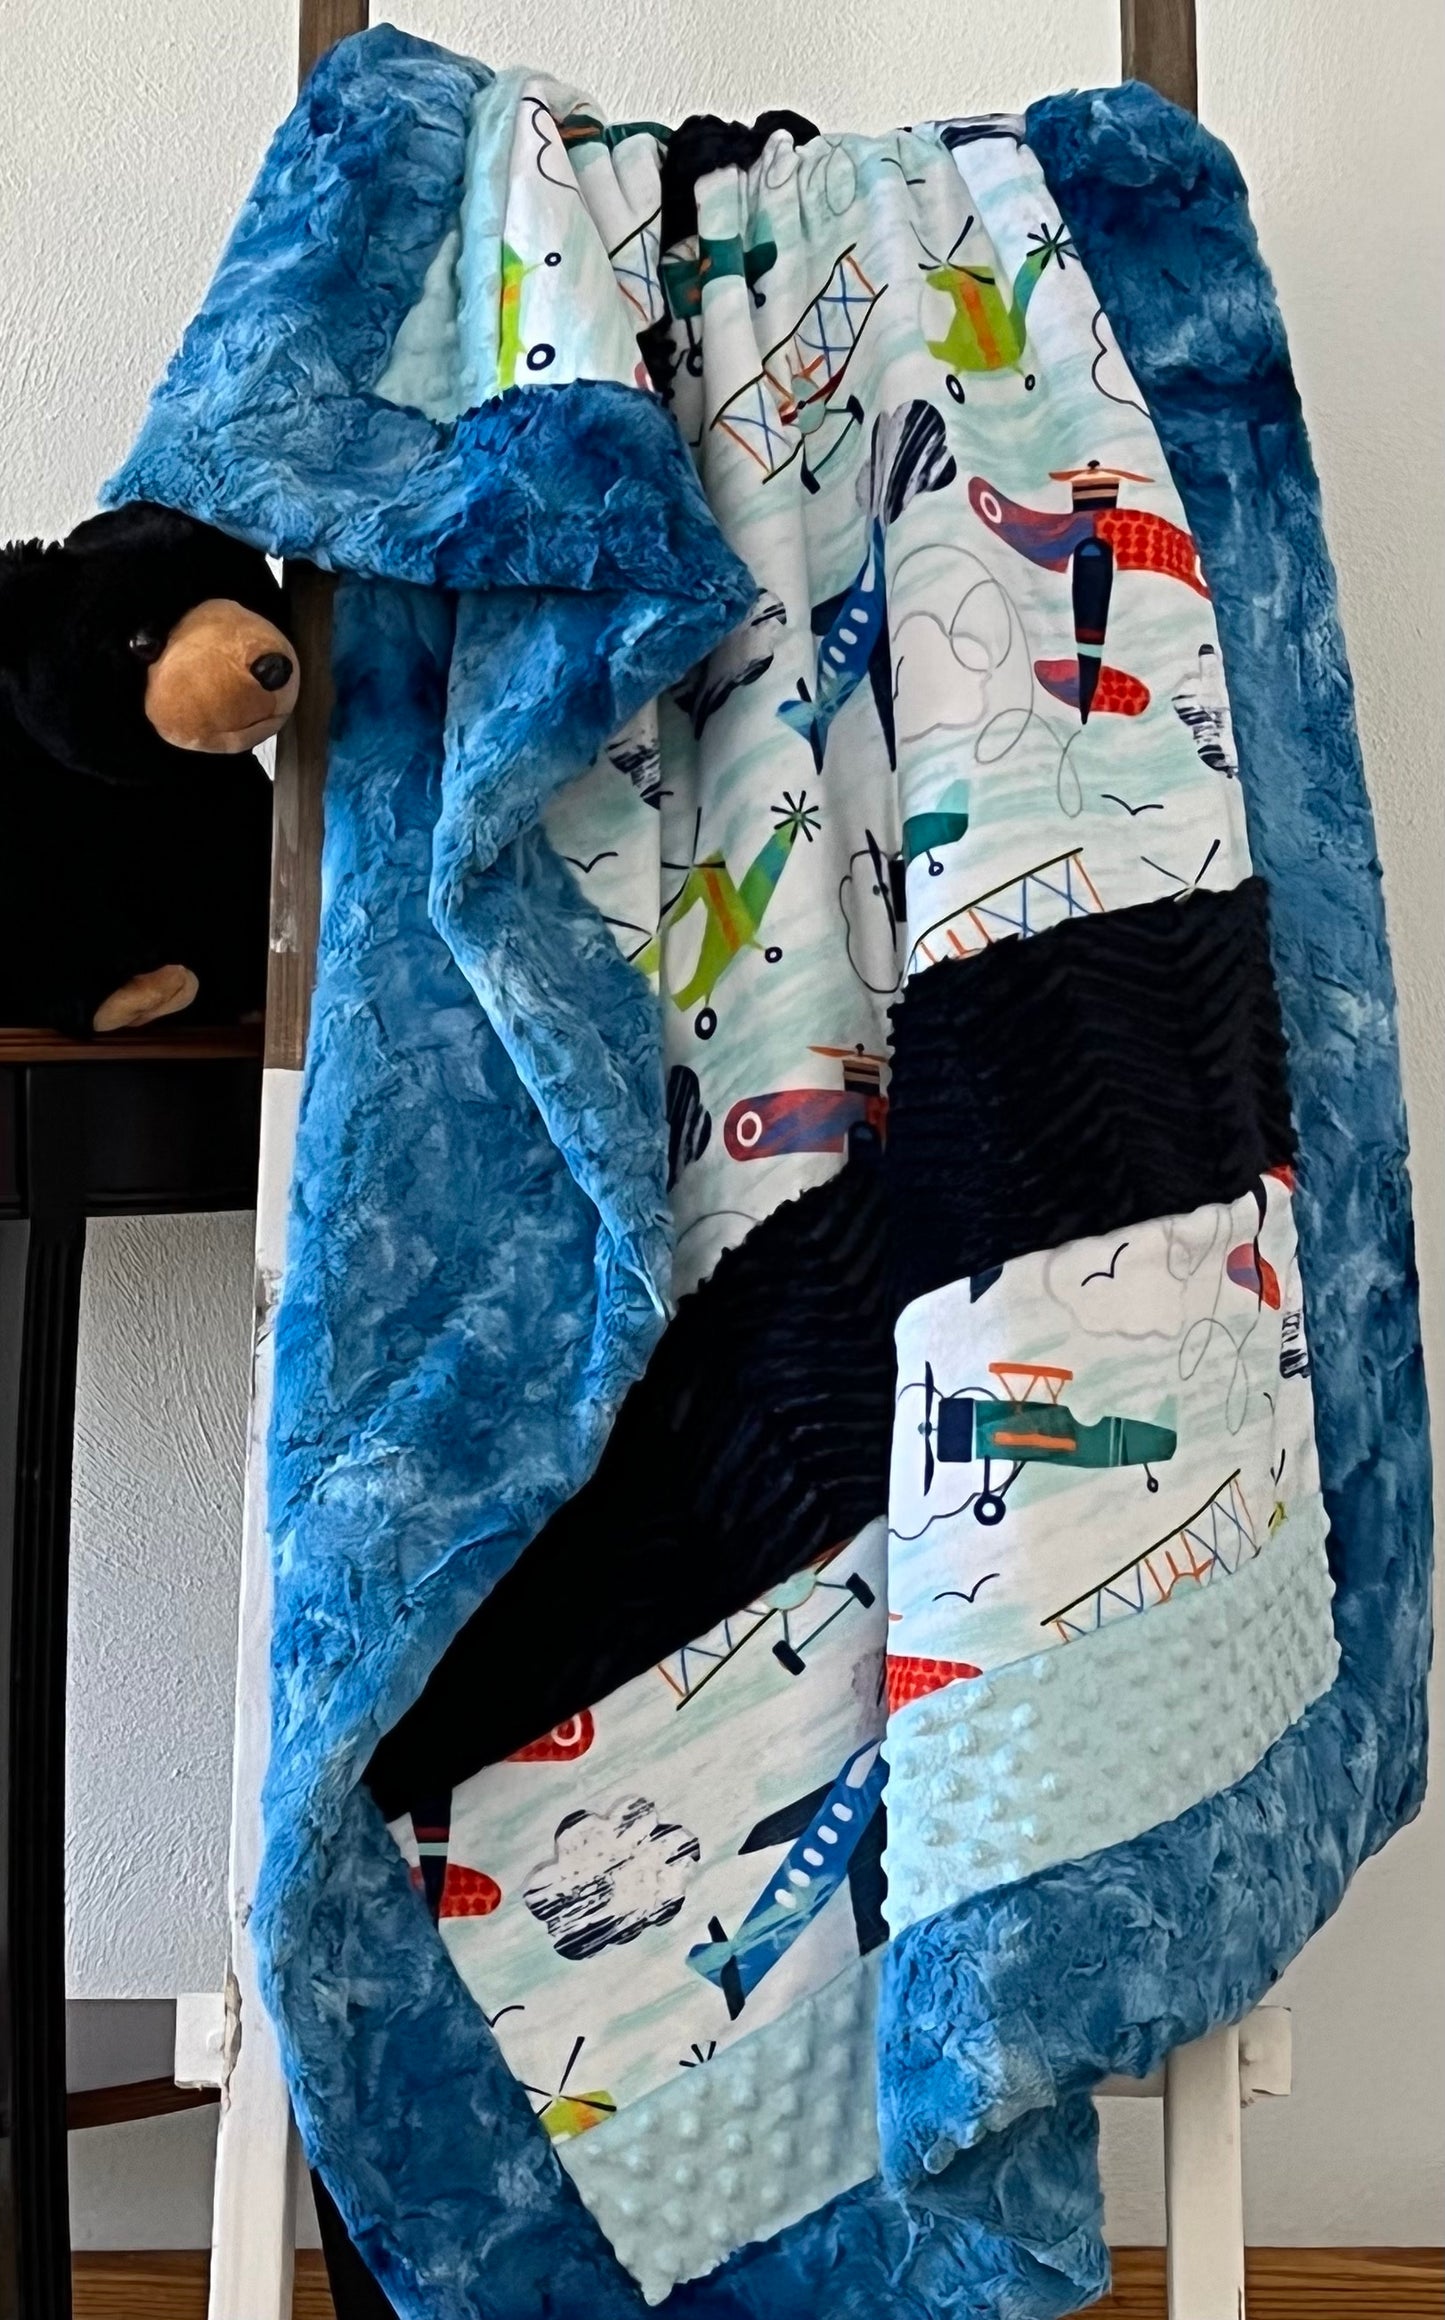 Hyber-Native "In the Clouds" Crib Blanket